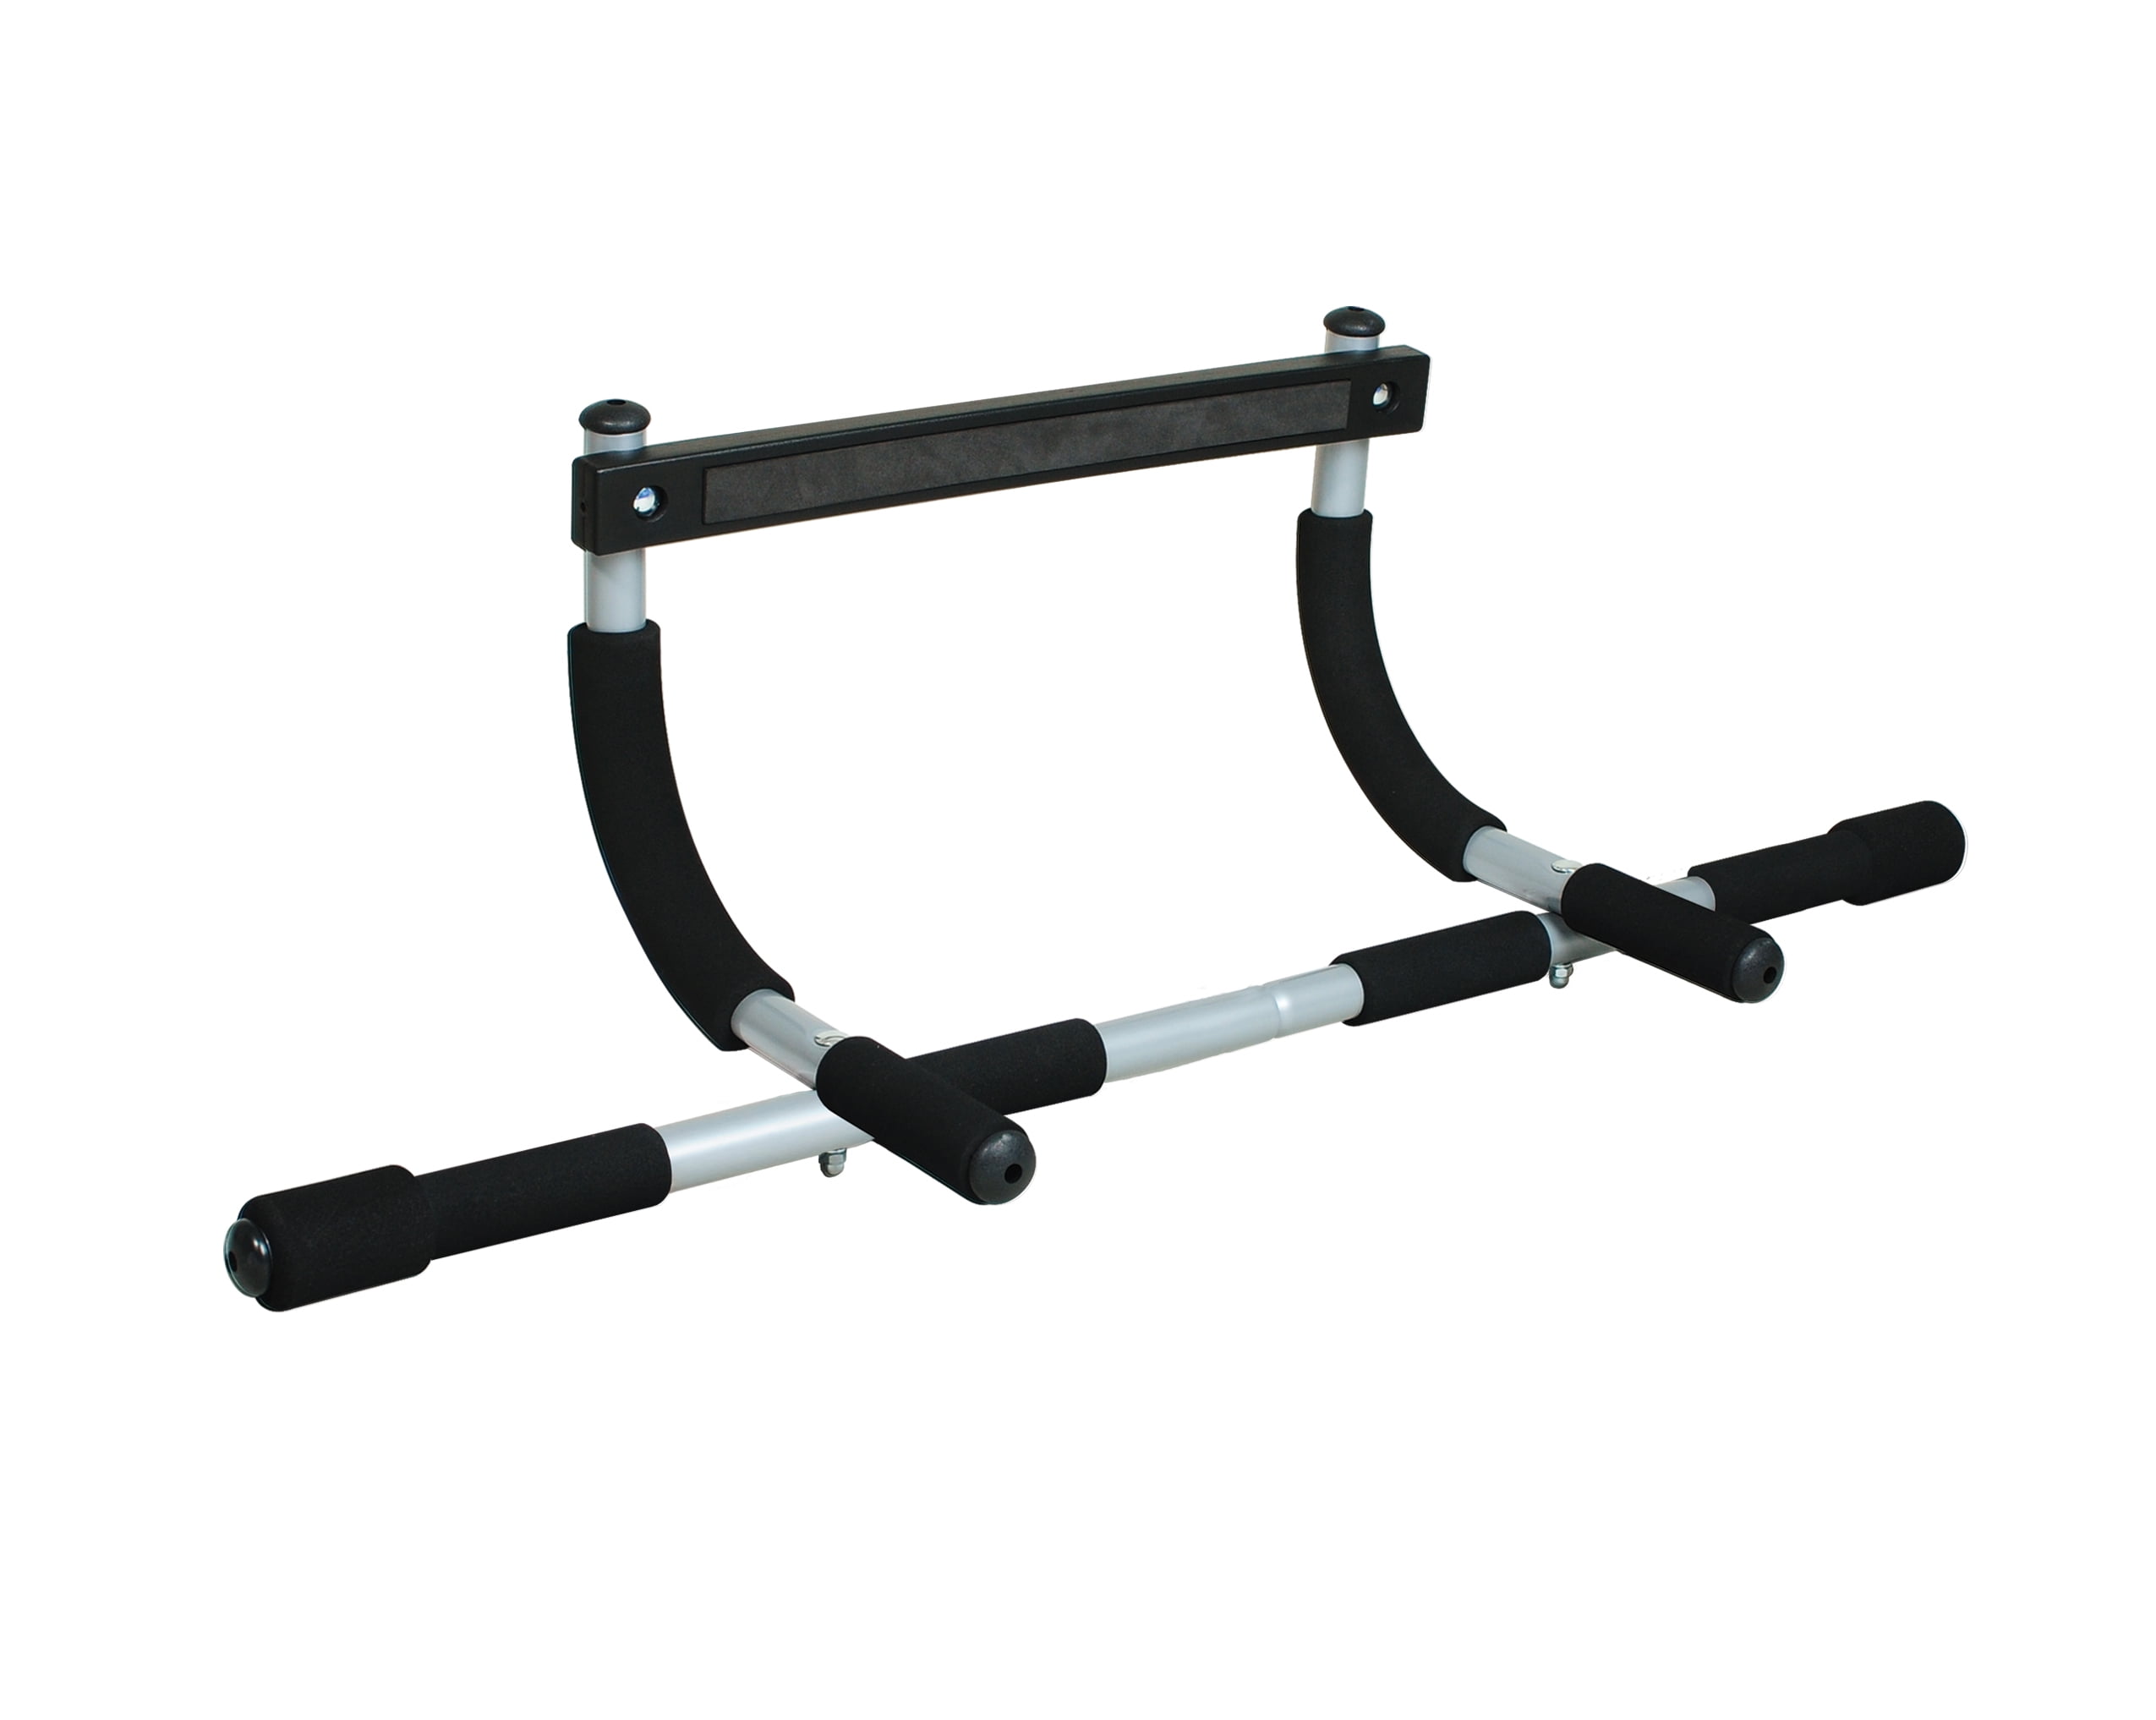 Pull Chin Up Bar Wall Mounted Home Iron Gym Exercise Dips Upper Body Workout 